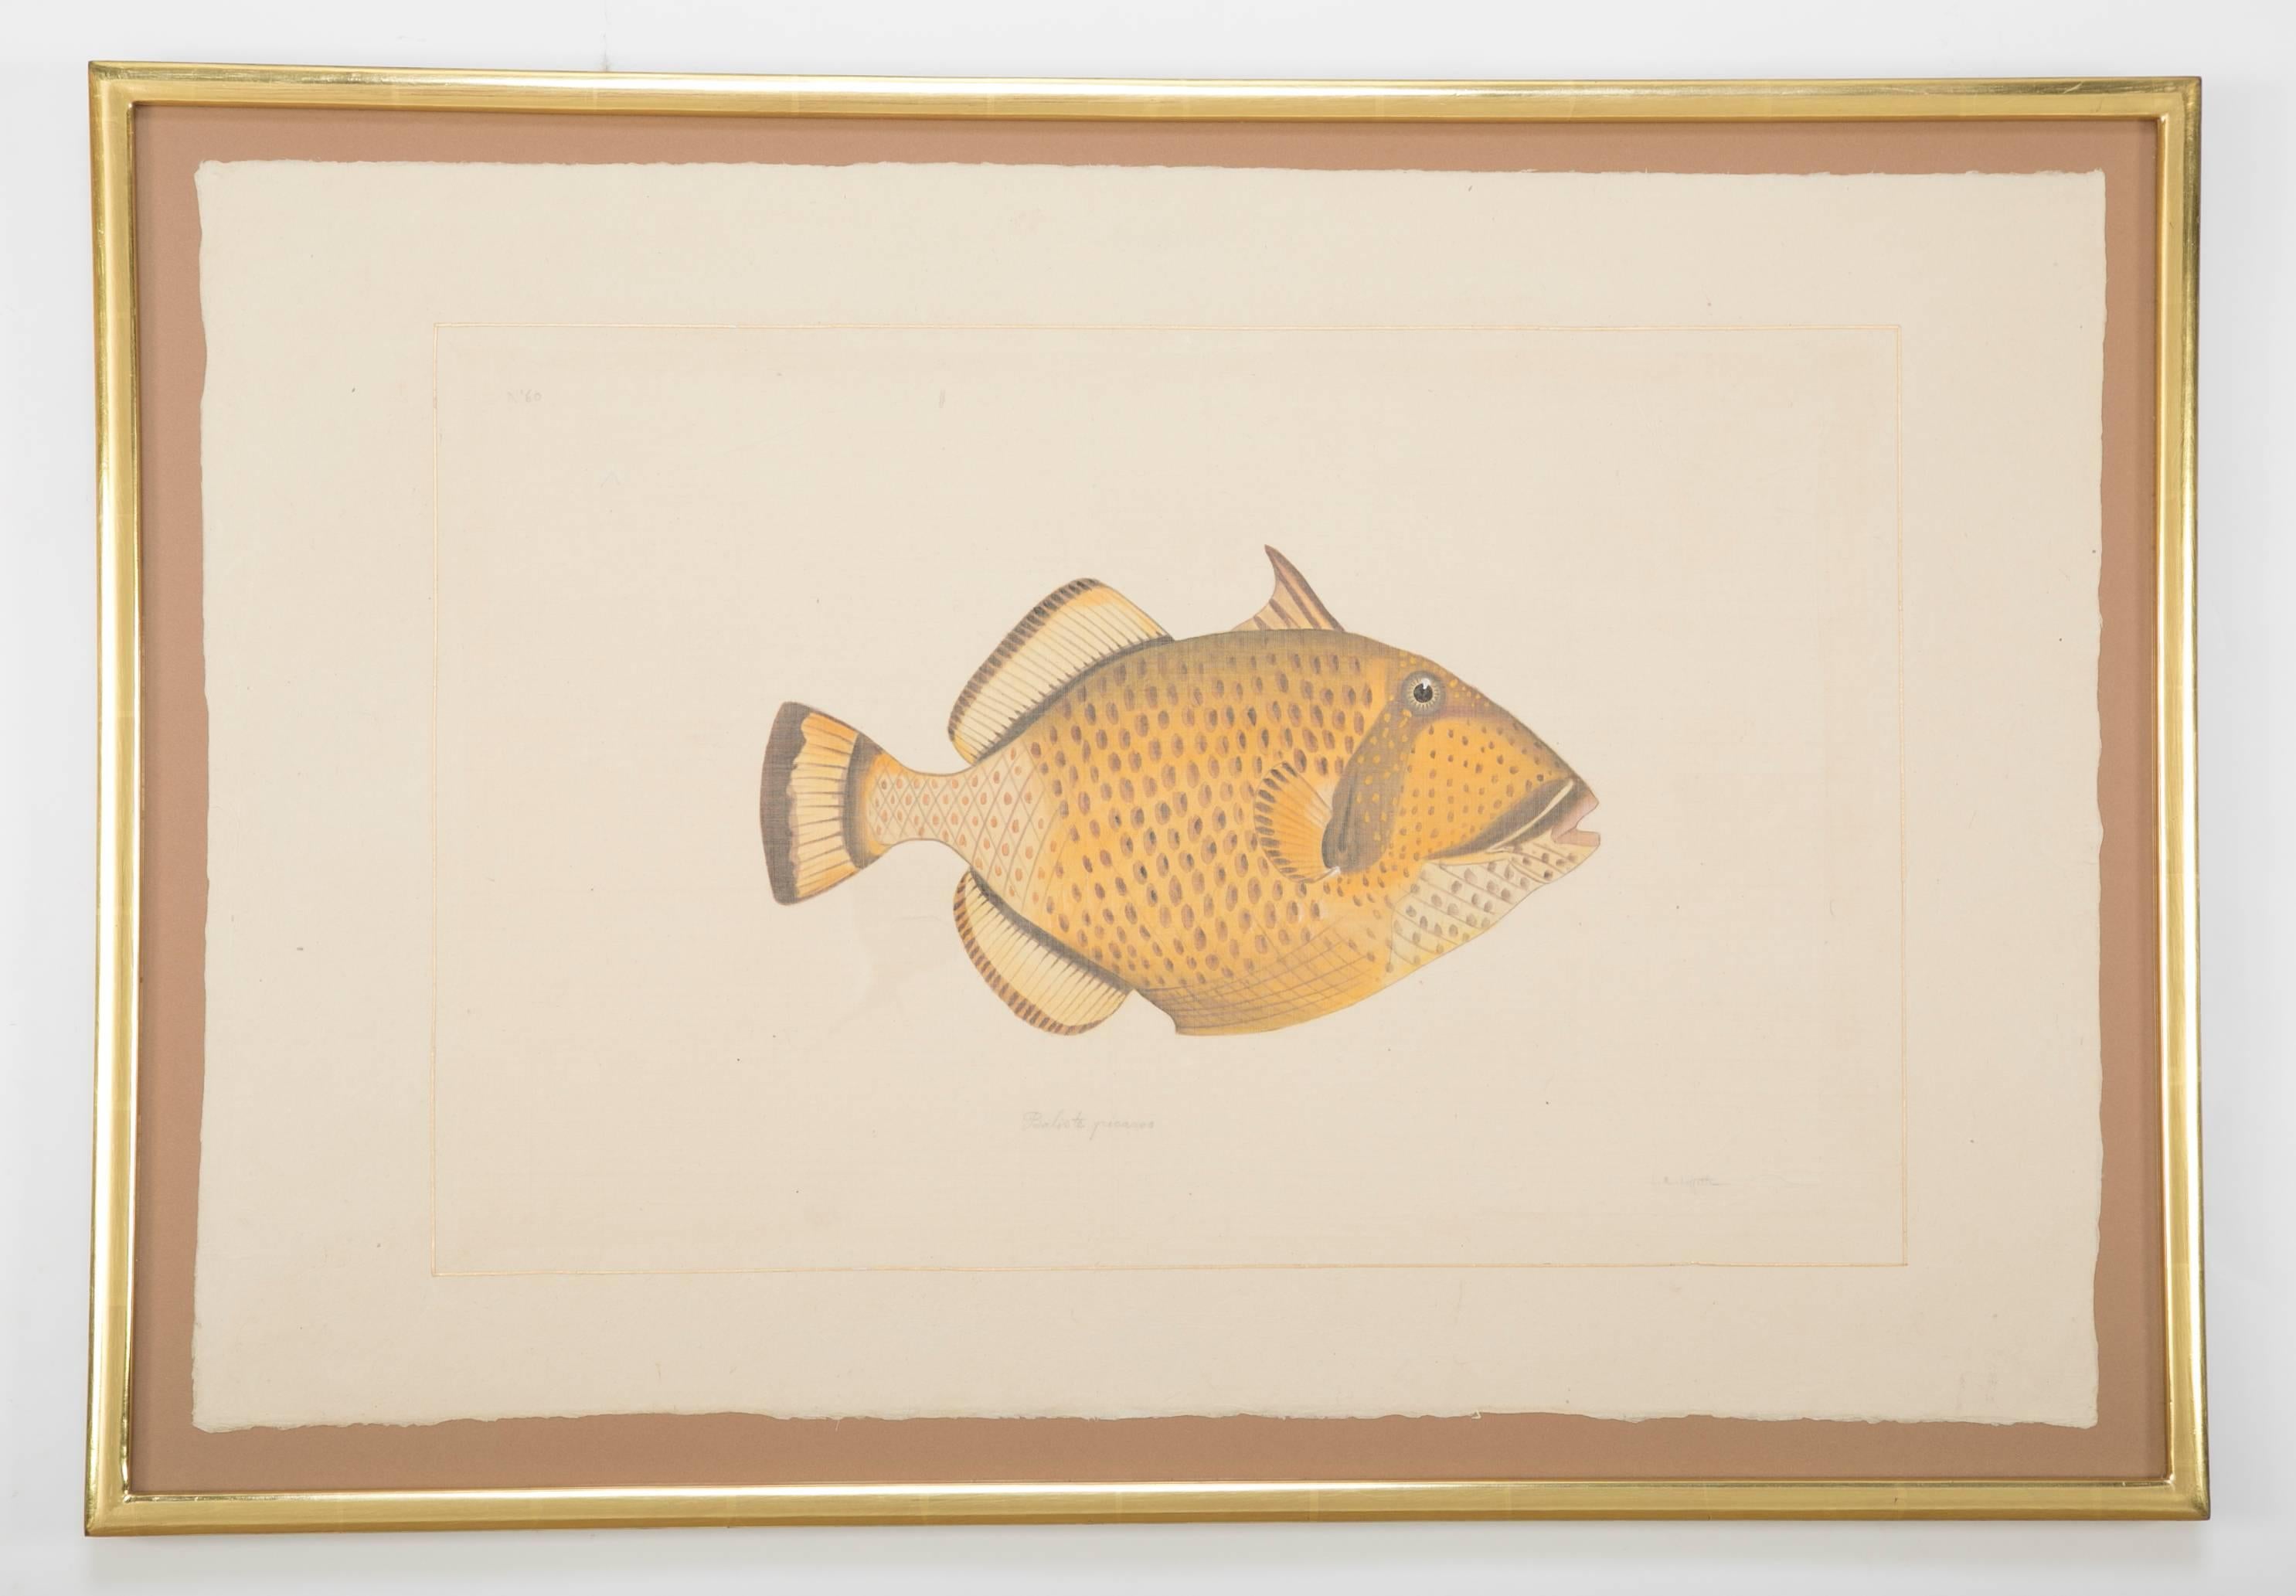 La Roche Laffitte hand-painted fish on silk mounted on handmade pith paper.